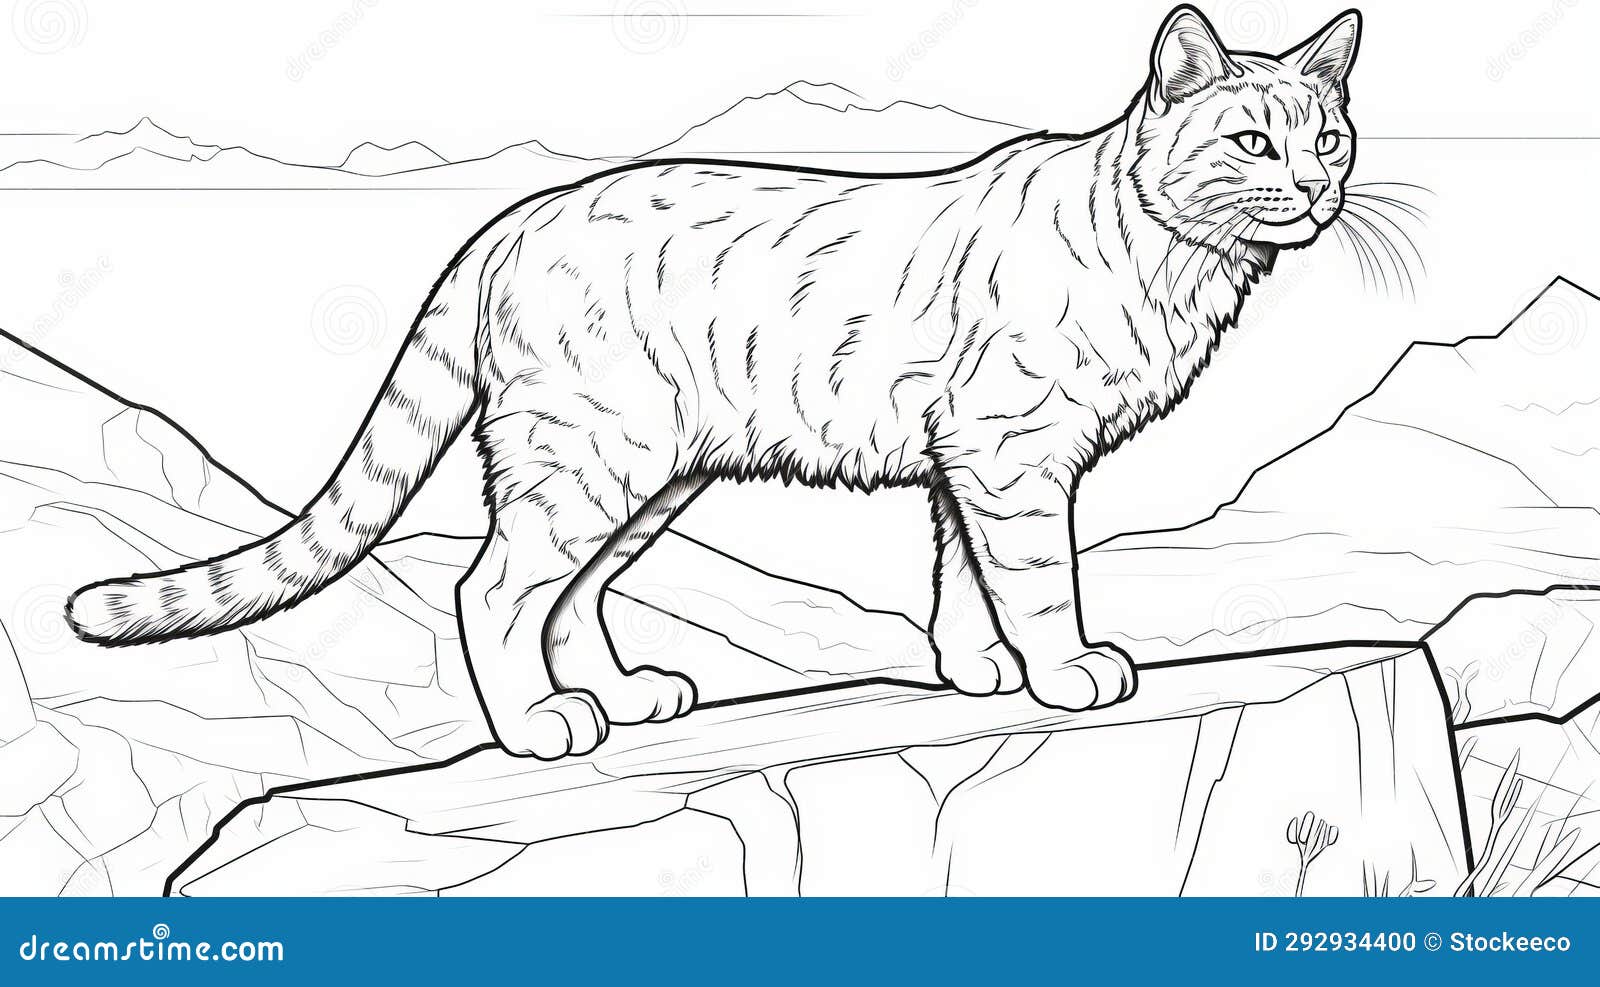 Bobcat coloring page stock illustrations â bobcat coloring page stock illustrations vectors clipart